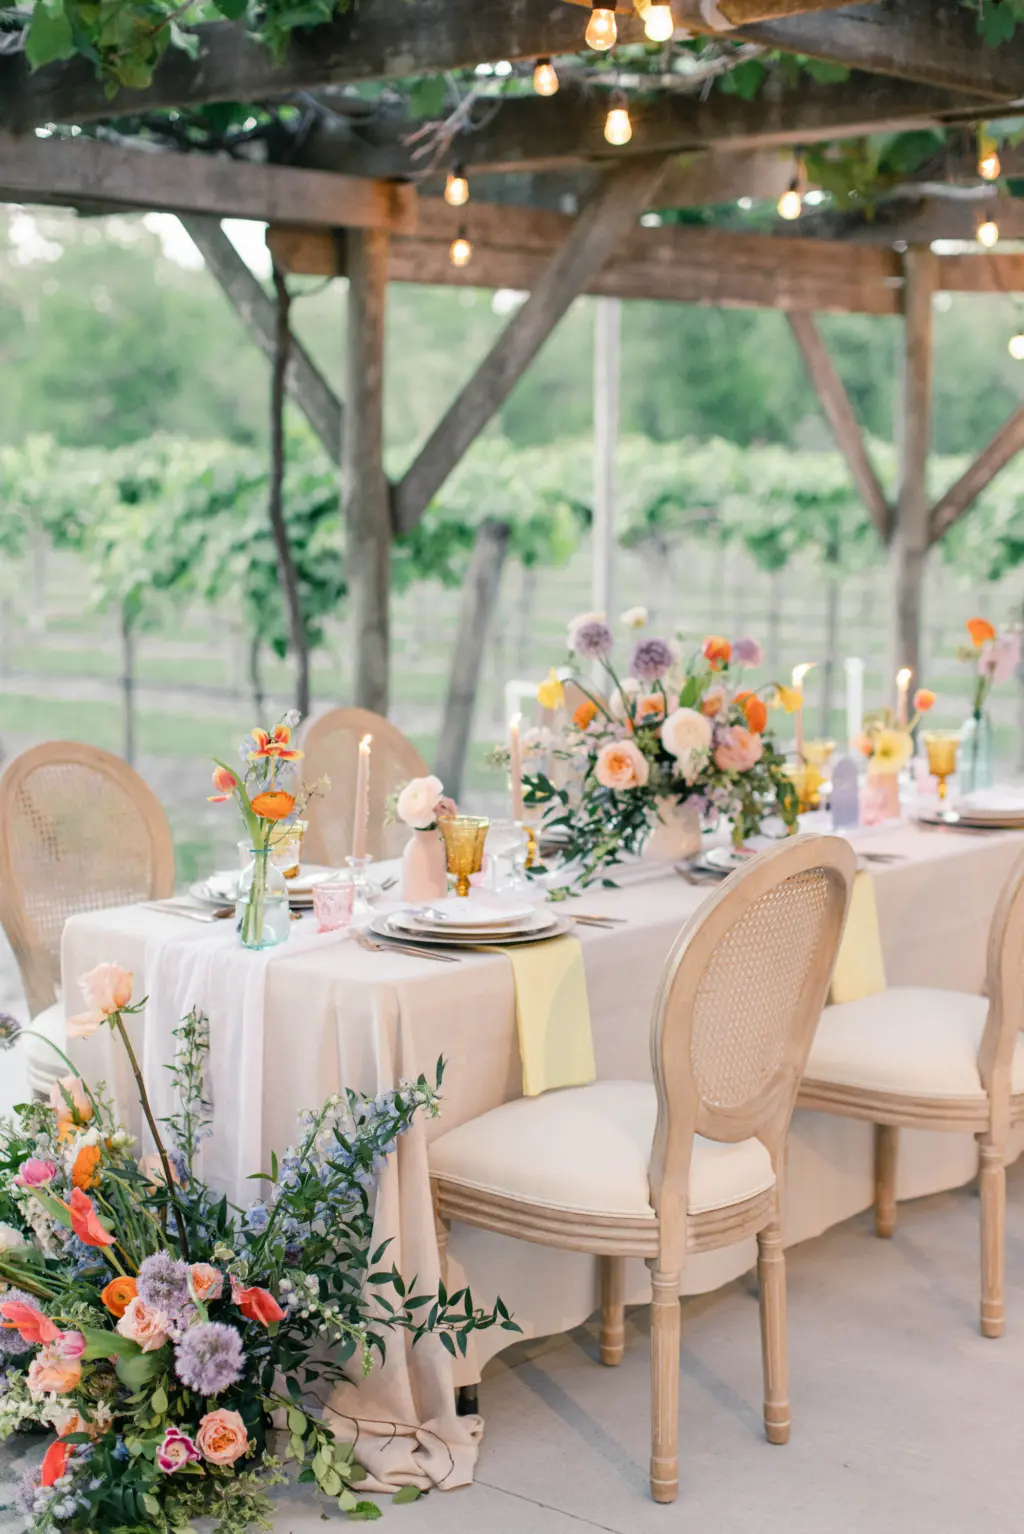 Spring Whimsical Outdoor Vineyard Wedding Reception Decor Inspiration | Cane Rattan White Oak Chairs | Orange Orchids, Blue Stock Flowers, Pink Garden Rose Floor and Feasting Table Centerpiece Ideas | Tampa Bay Florist Save The Date Florida | Planner MDP Events